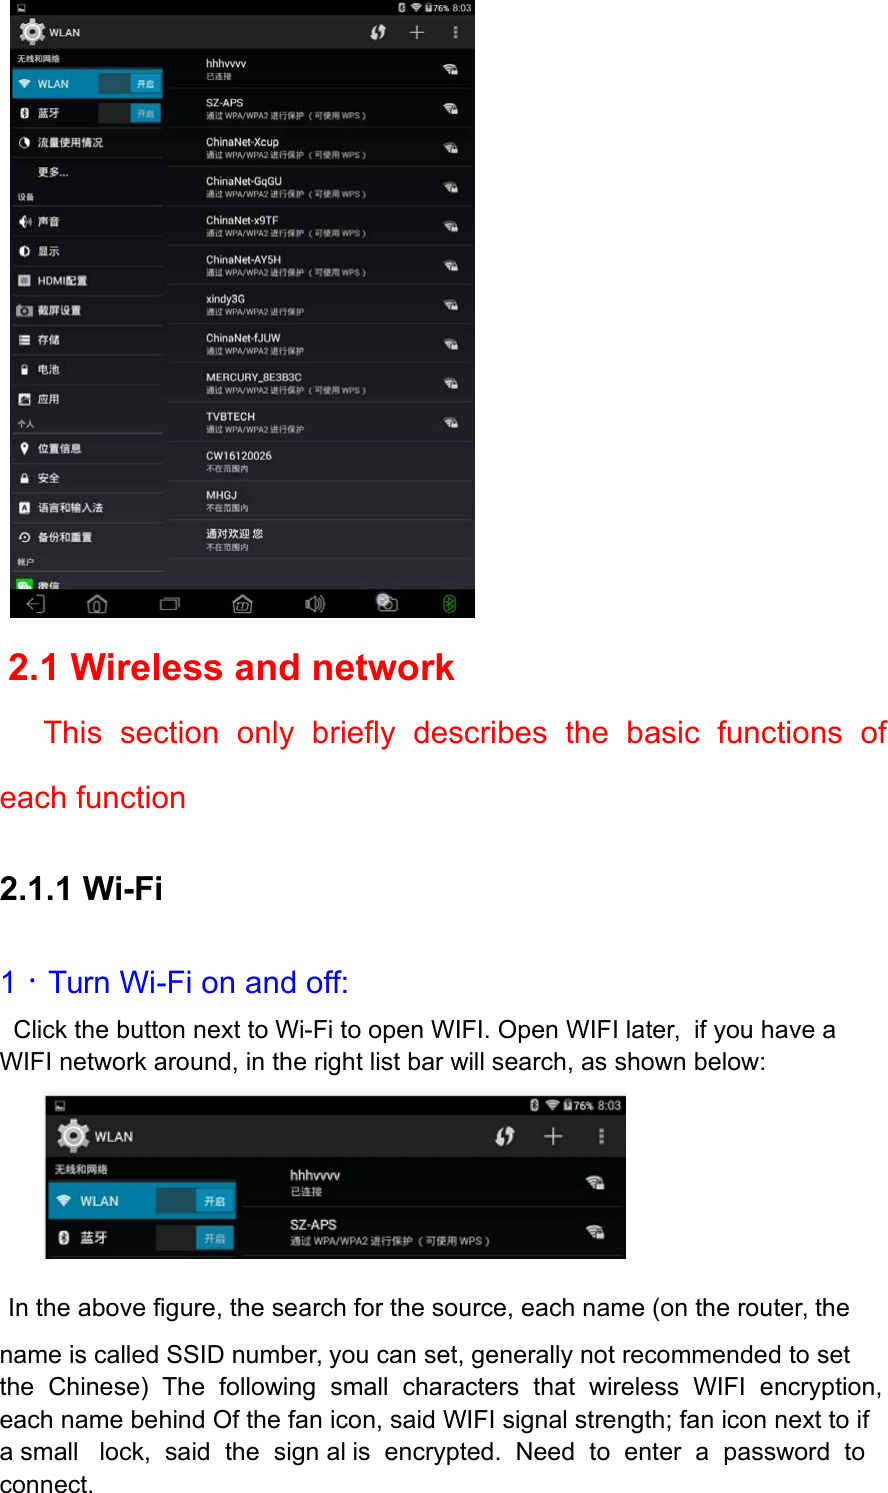     2.1 Wireless and network      This  section  only  briefly  describes  the  basic  functions  of each function 2.1.1 Wi-Fi 1．Turn Wi-Fi on and off:   Click the button next to Wi-Fi to open WIFI. Open WIFI later,  if you have a WIFI network around, in the right list bar will search, as shown below:    In the above figure, the search for the source, each name (on the router, the name is called SSID number, you can set, generally not recommended to set the  Chinese)  The  following  small  characters  that  wireless  WIFI  encryption, each name behind Of the fan icon, said WIFI signal strength; fan icon next to if a small   lock,  said  the  sign al  is  encrypted.  Need  to  enter  a  password  to  connect. 